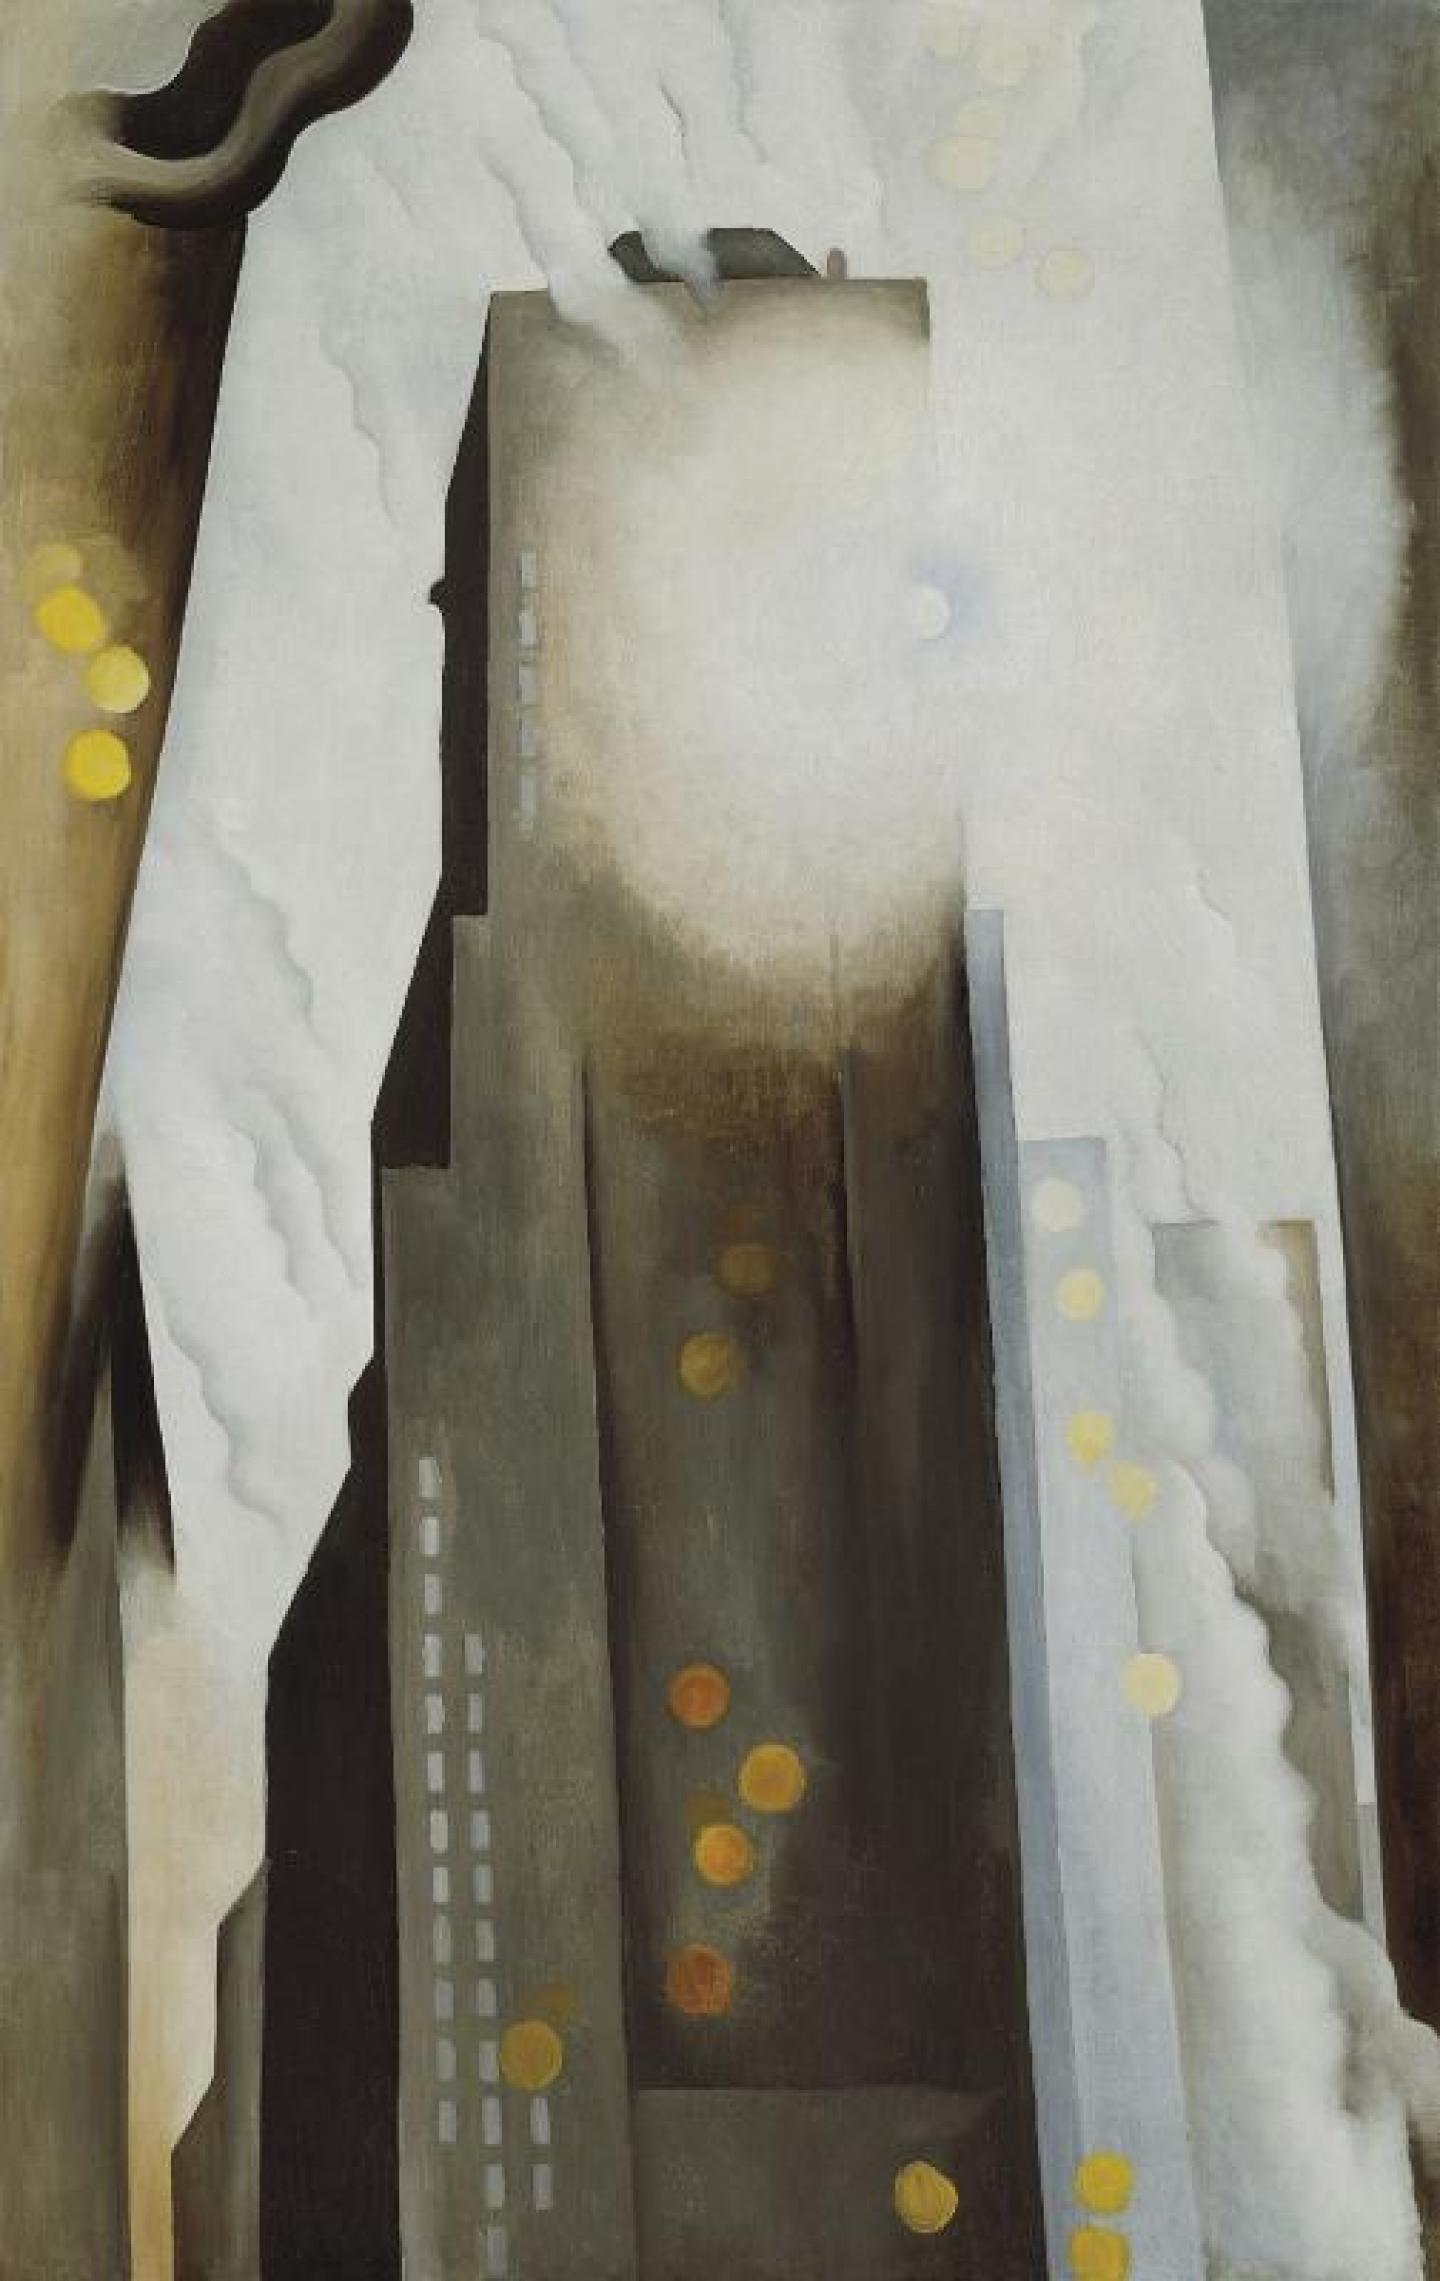 Georgia O'Keeffe, The Shelton with Sunspots, N.Y. 1926, @ Centre Pompidou